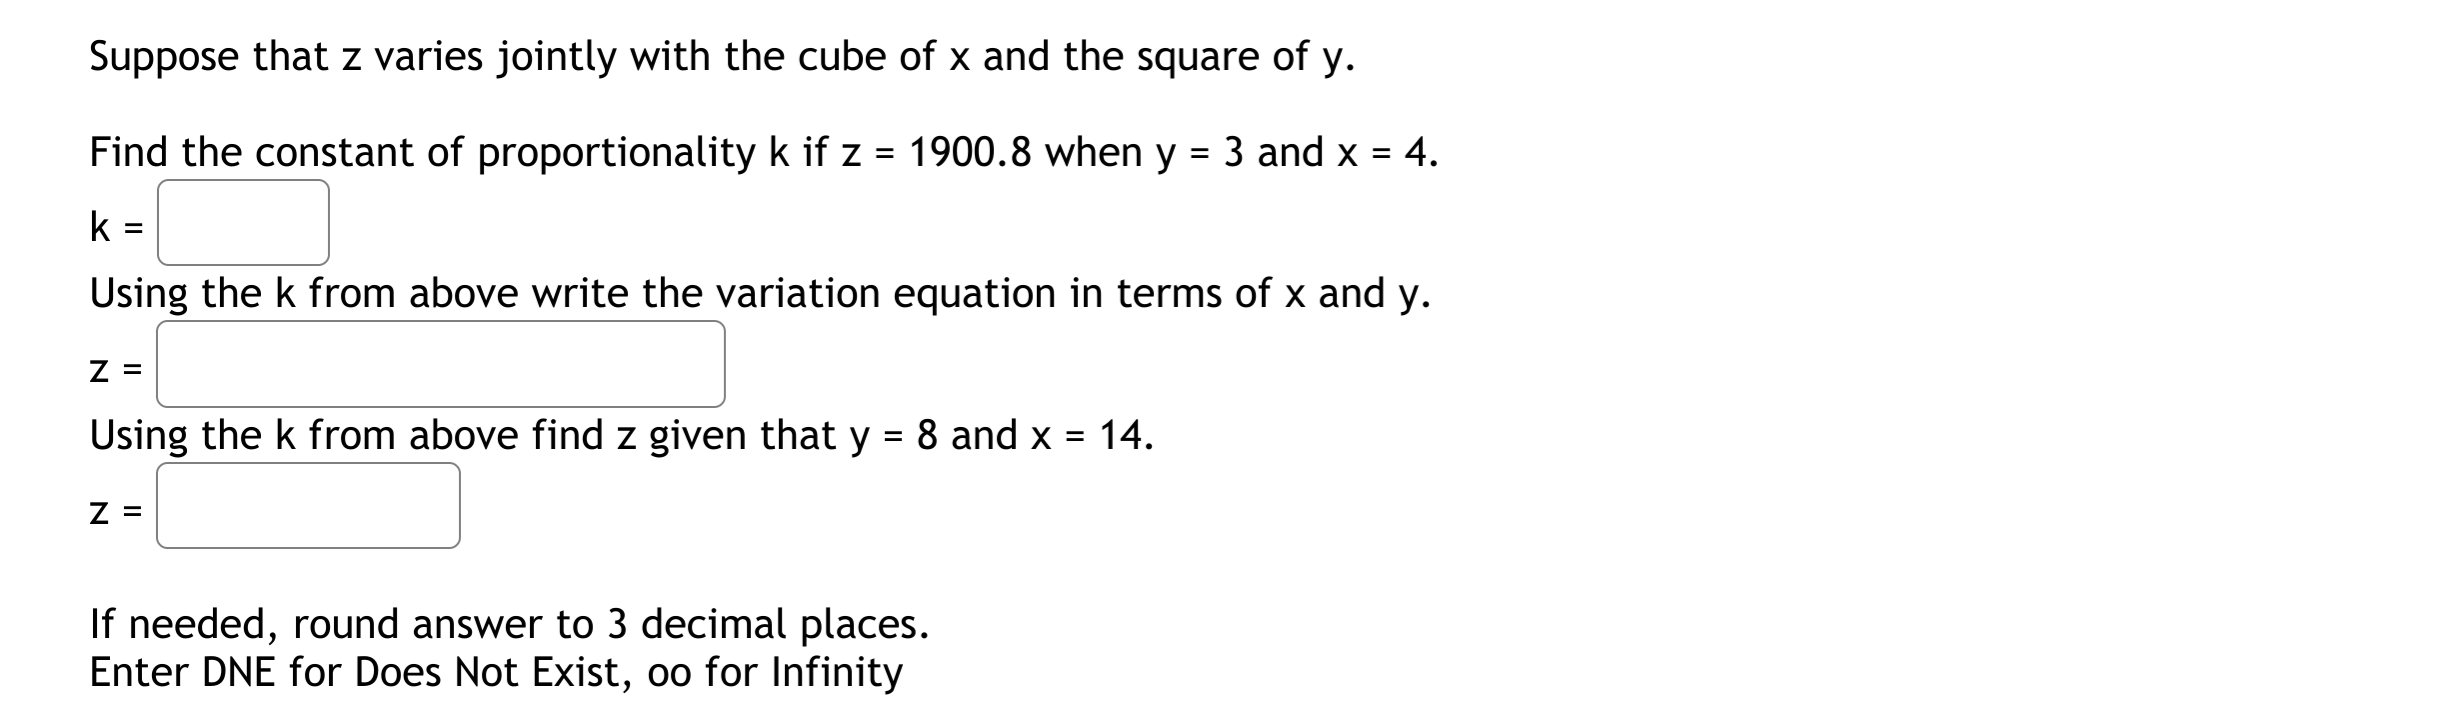 Suppose that z varies jointly with the cube of x and the square of y.
Find the constant of proportionality k if z = 1900.8 when y = 3 and x = 4.
%3D
%3D
k
Using the k from above write the variation equation in terms of x and y.
Z =
Using the k from above find z given that y = 8 and x = 14.
Z =
